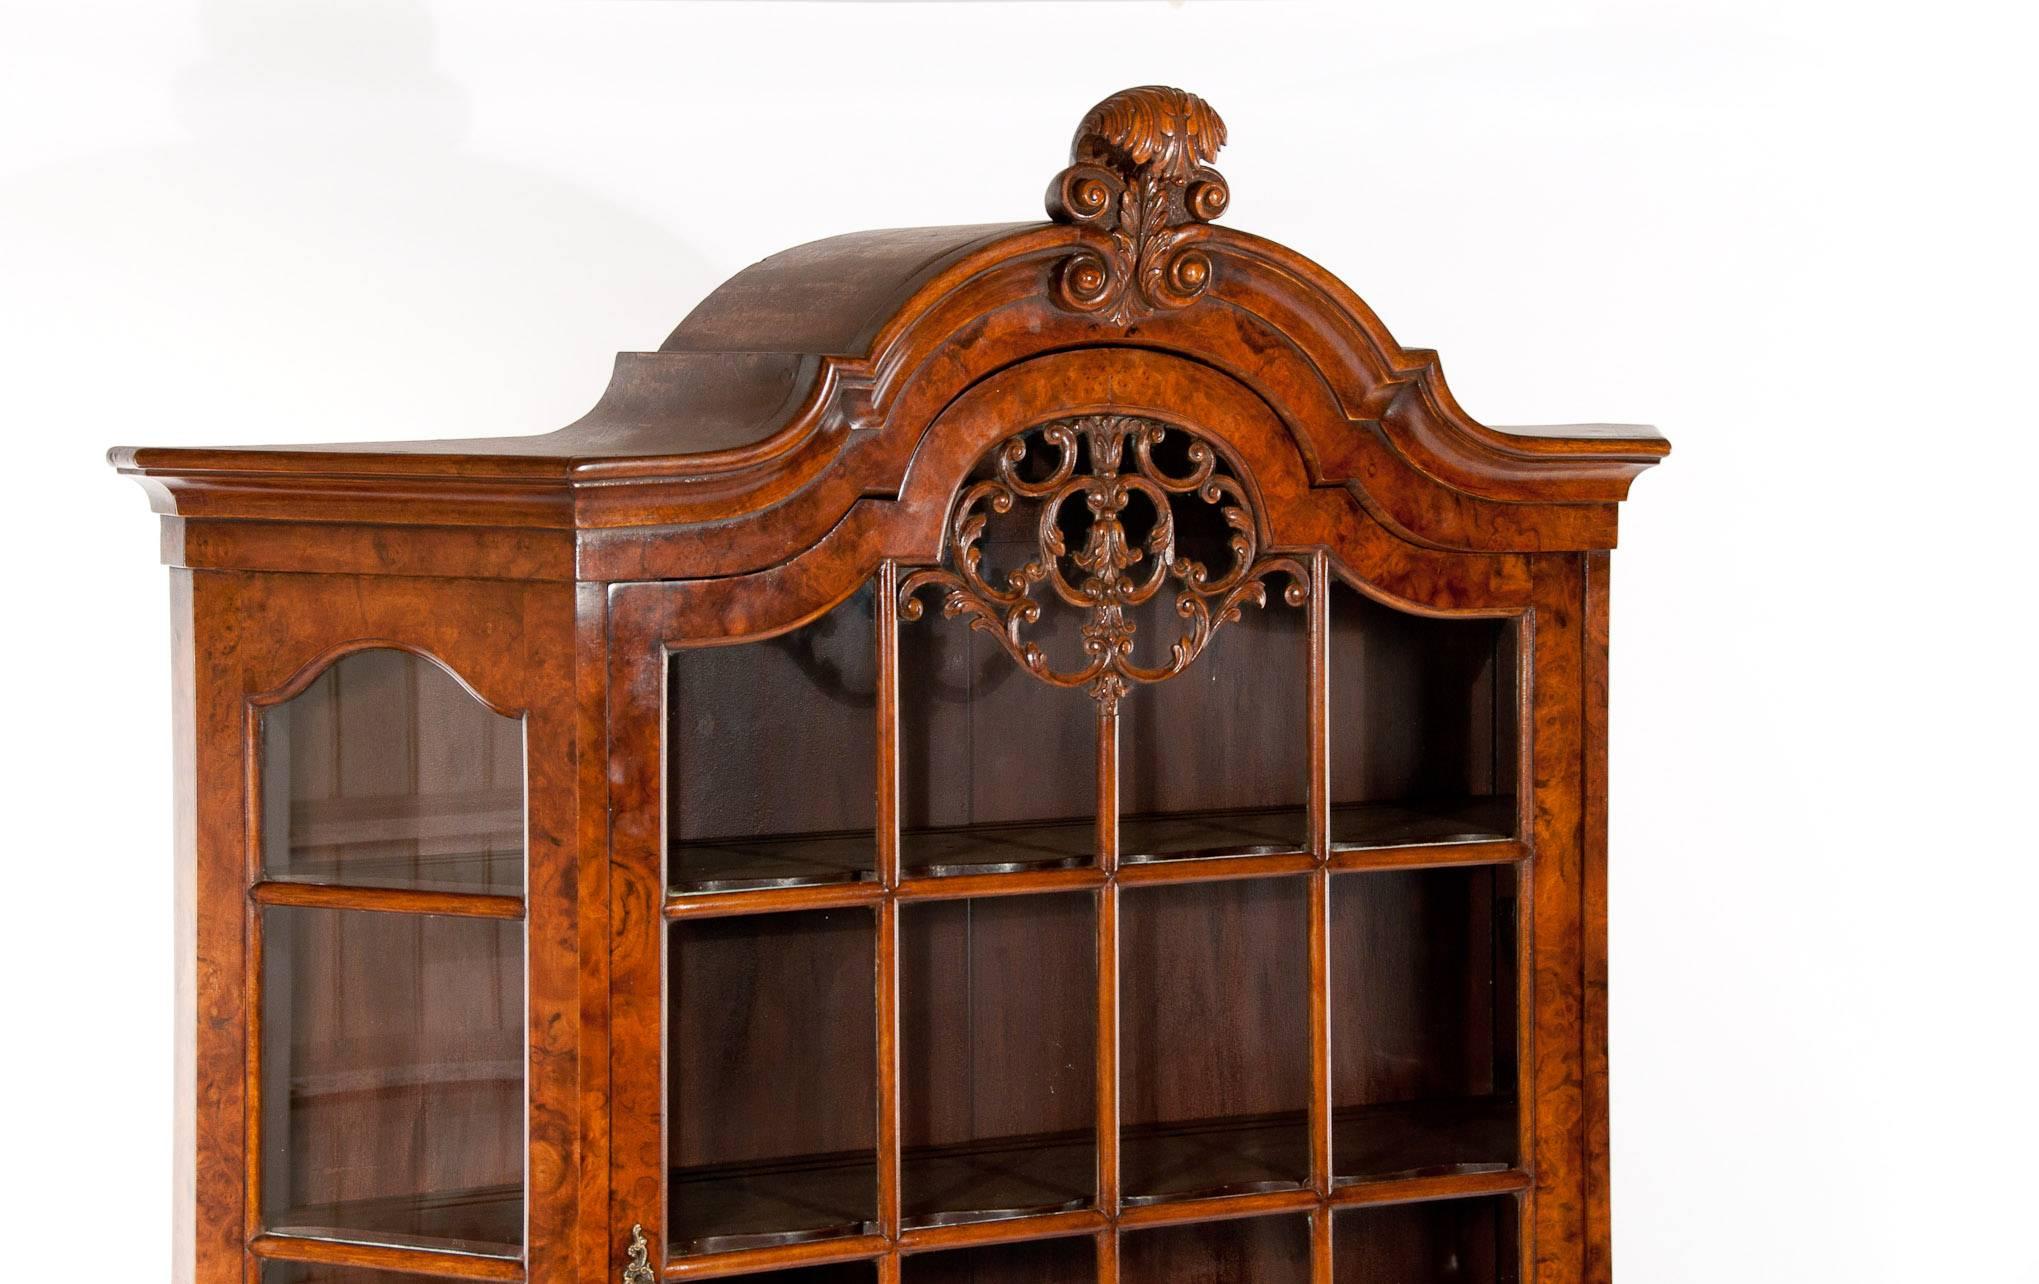 A wonderful burr walnut Dutch Bombay bookcase / display cabinet.
This lovely quality and well proportioned bookcase has obtained a delightful warm colour and patina with striking burr walnut veneers dating to circa 1930-1950s.
The shaped top